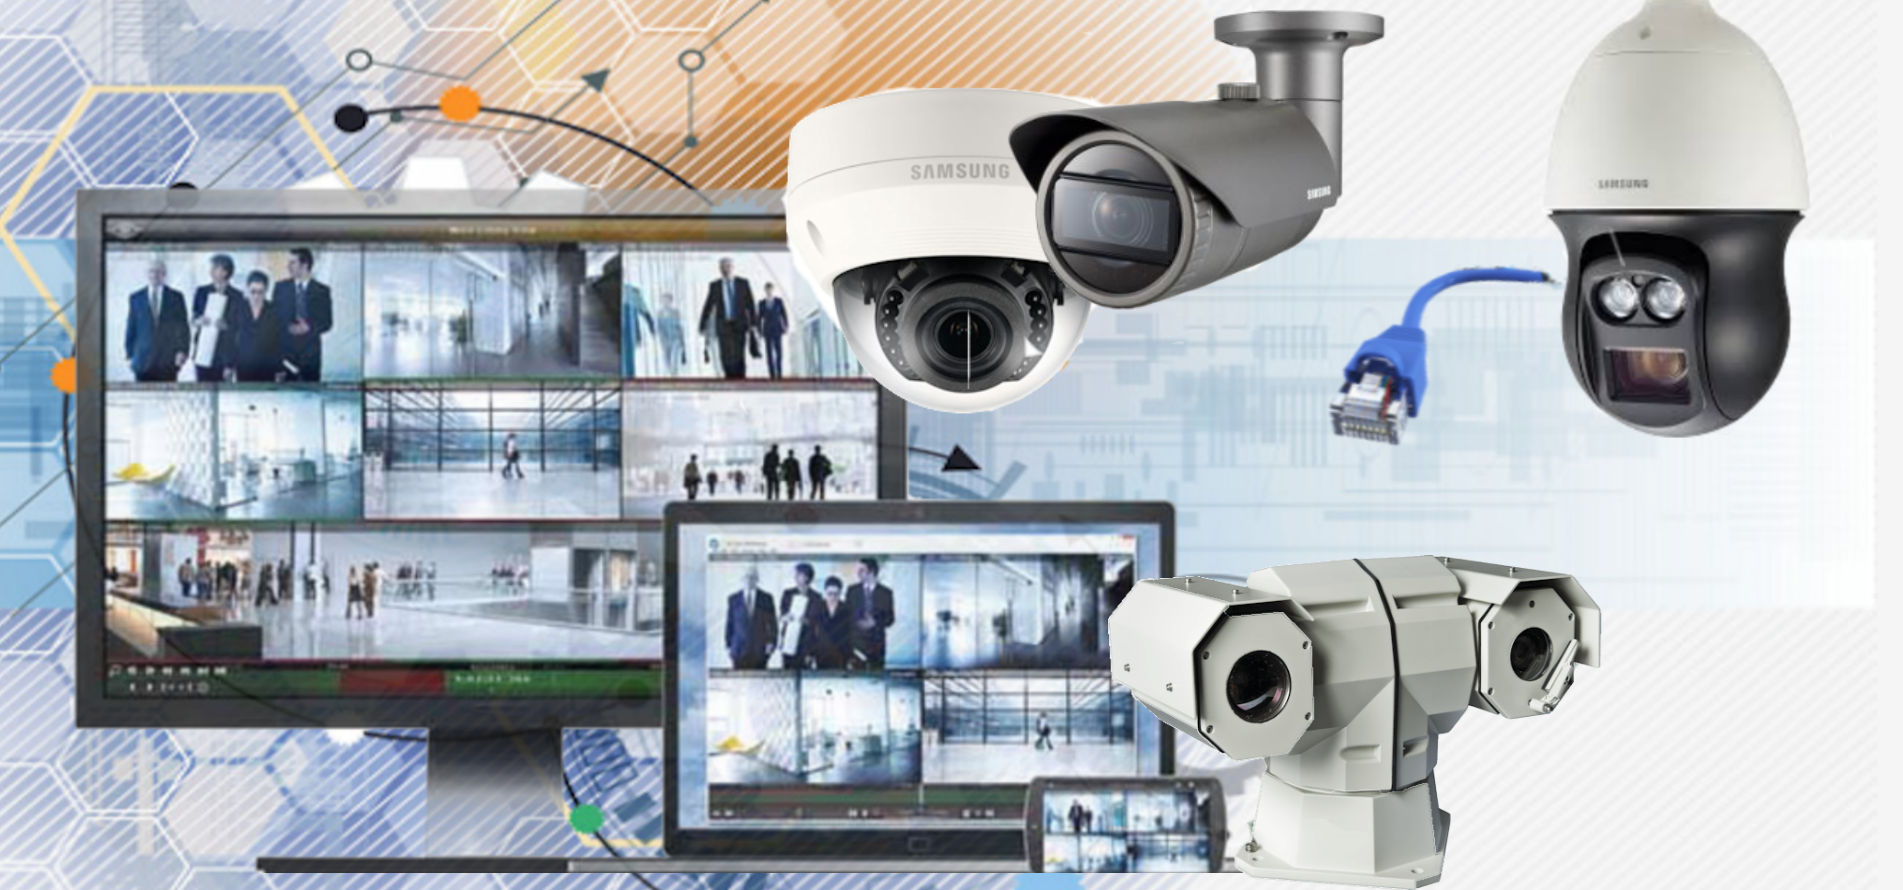 MOI Approval CCTV Systems for Retail Stores